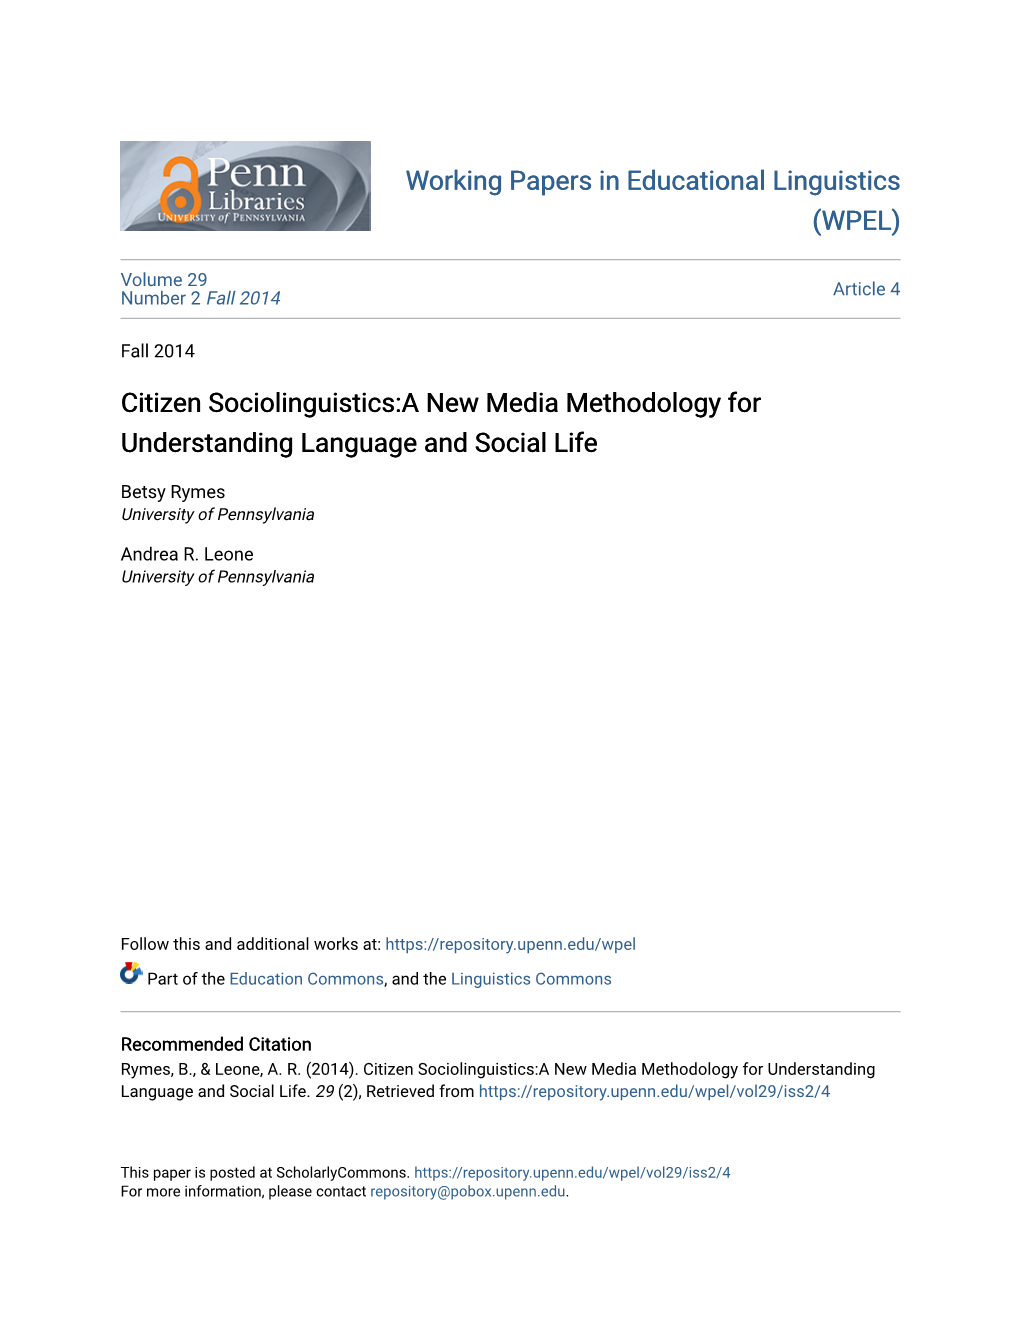 Citizen Sociolinguistics:A New Media Methodology for Understanding Language and Social Life